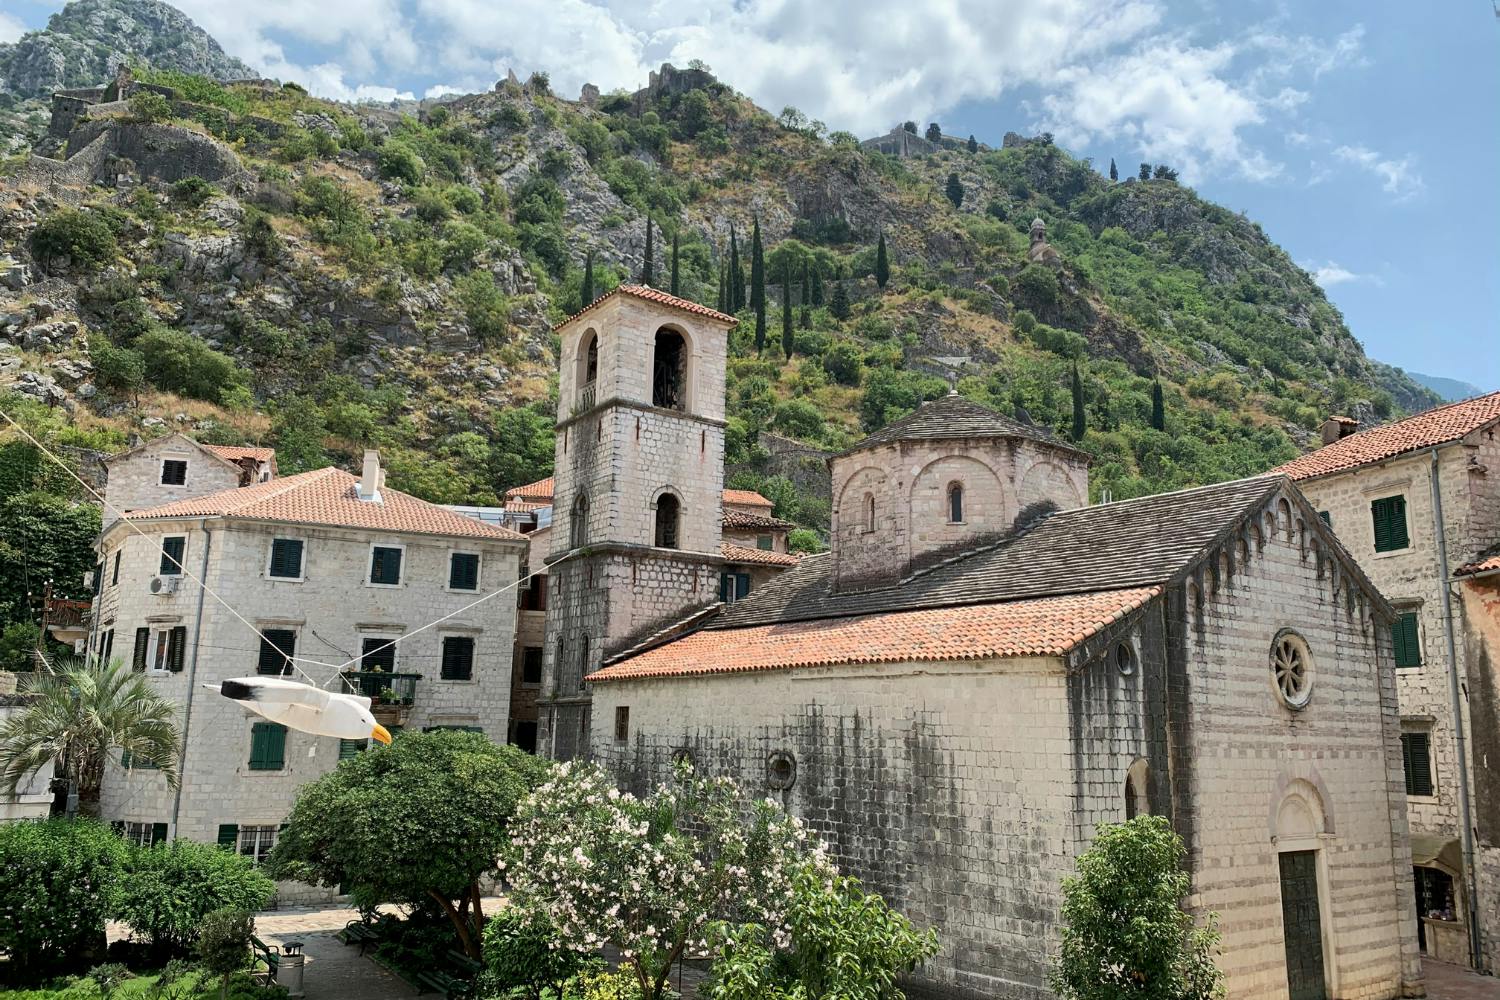 Self guided discovery walk in Kotor  medieval streets of Old Town